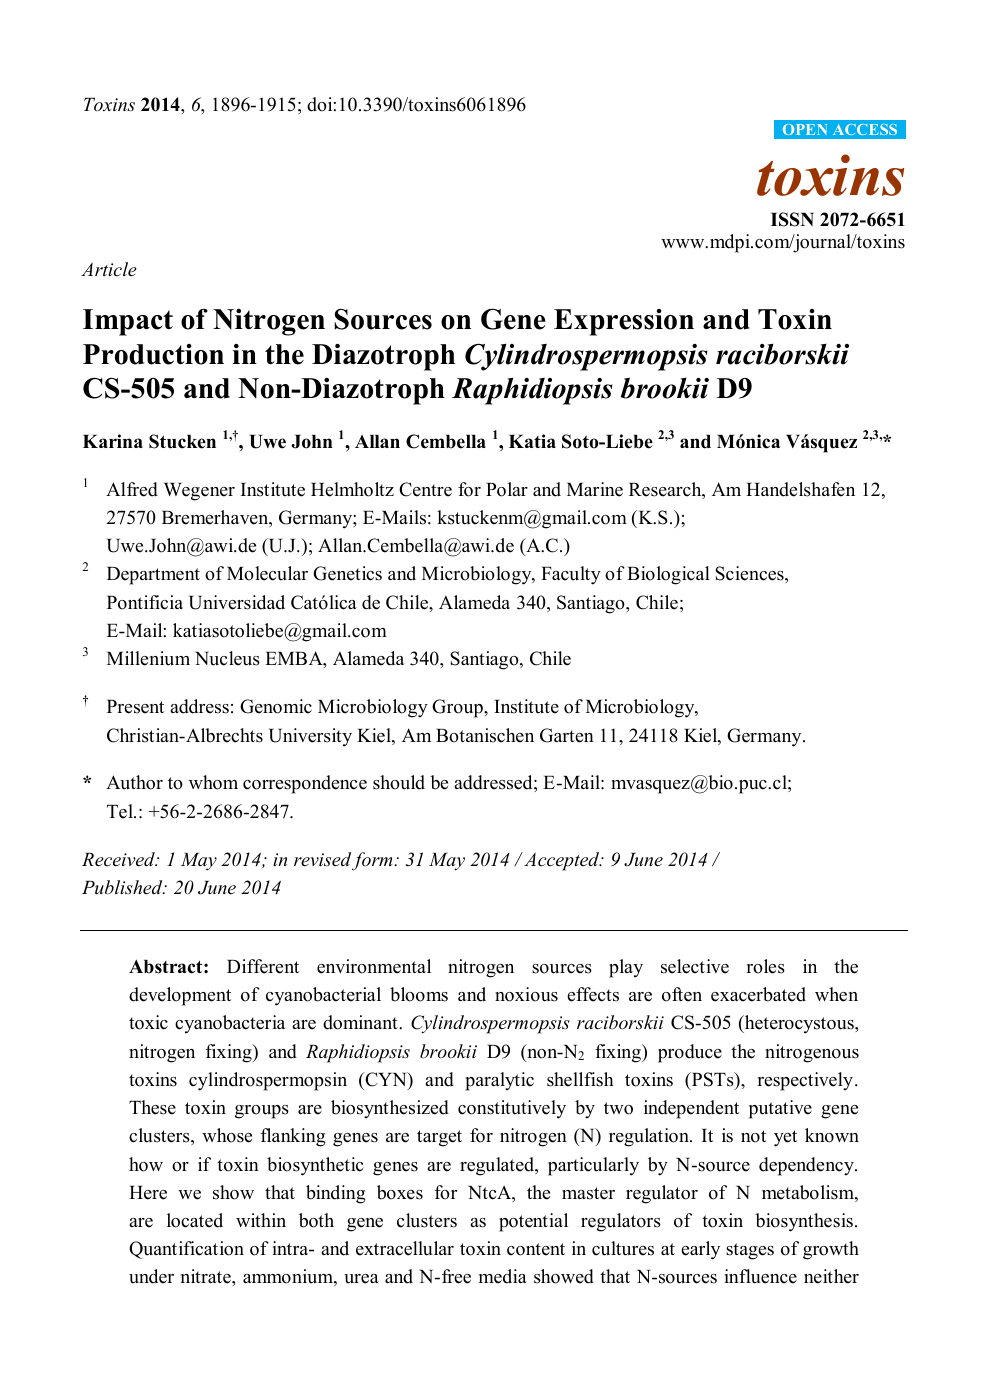 Impact Of Nitrogen Sources On Gene Expression And Toxin Production In The Diazotroph Cylindrospermopsis Raciborskii Cs 505 And Non Diazotroph Raphidiopsis Brookii D9 Topic Of Research Paper In Biological Sciences Download Scholarly Article